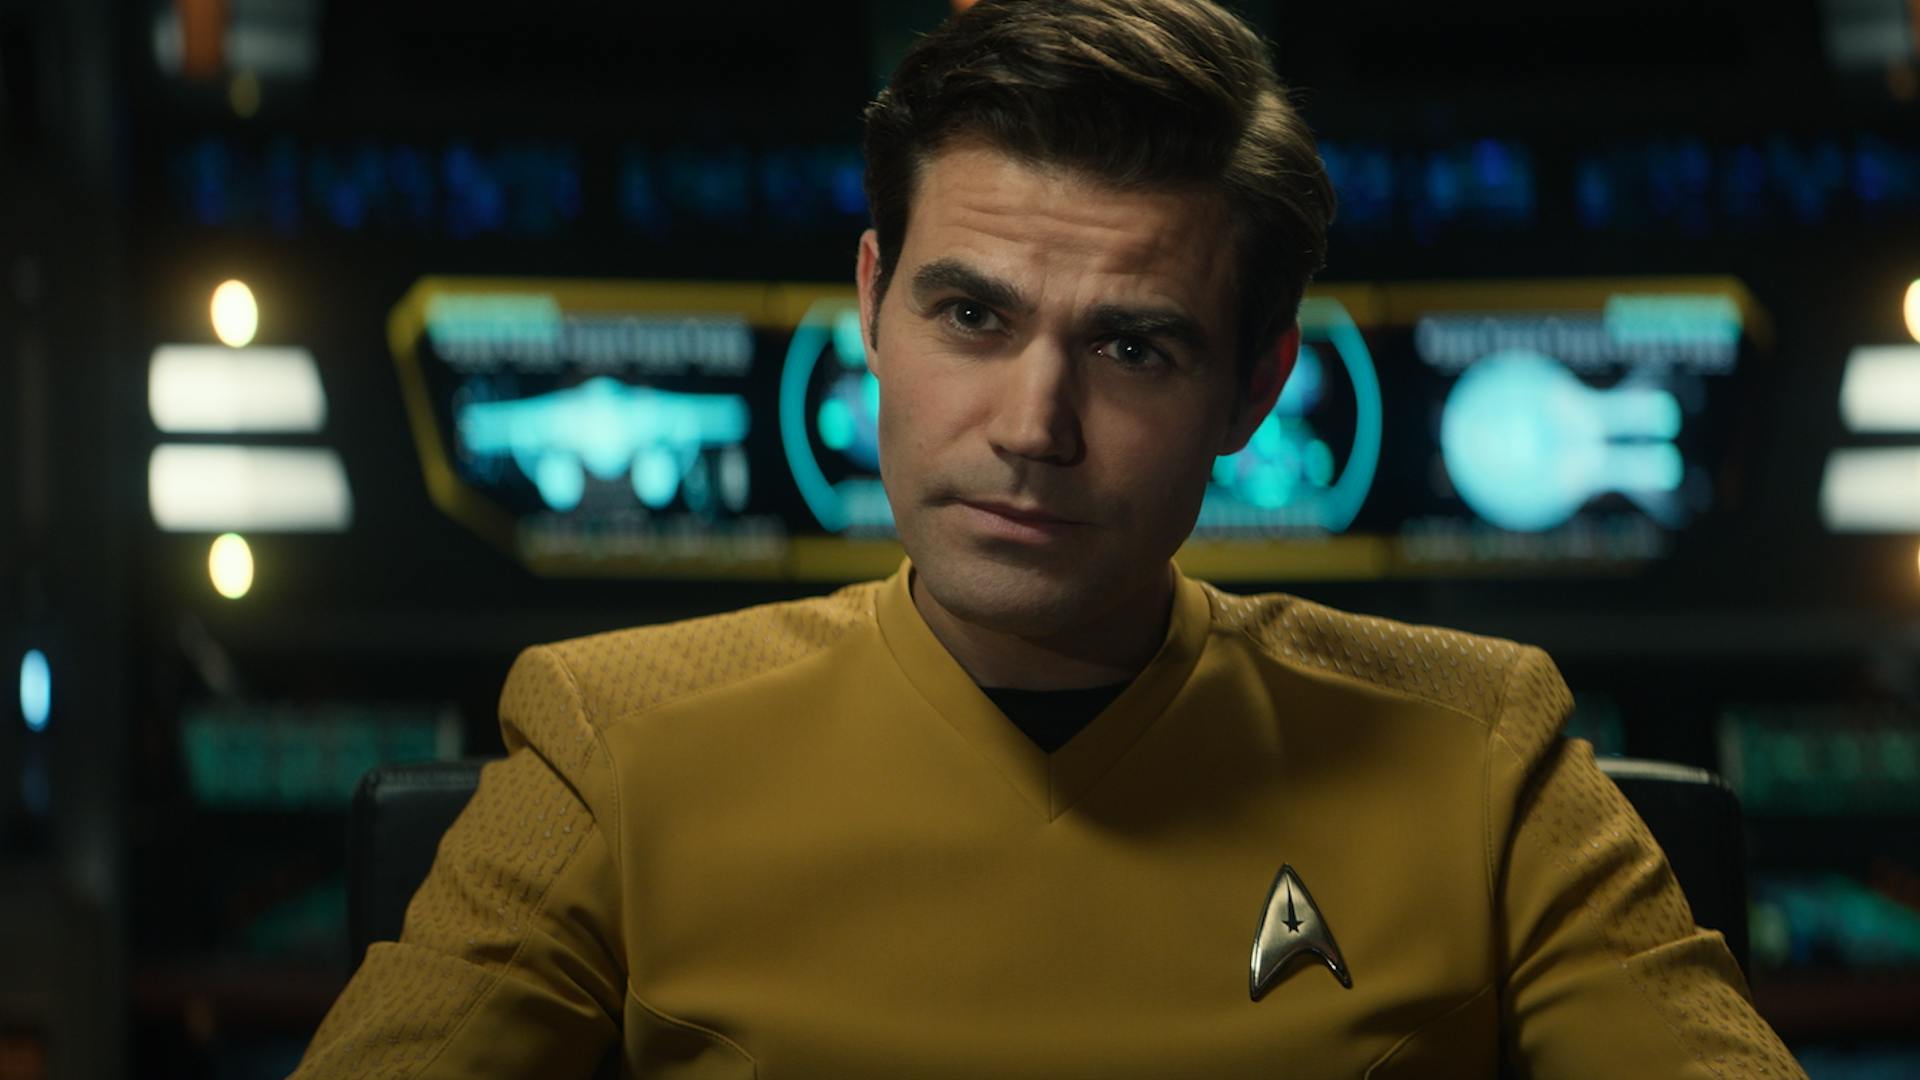 James Kirk (Paul Wesley) asks if the Enterprise needs aid from the bridge of the Farragut.